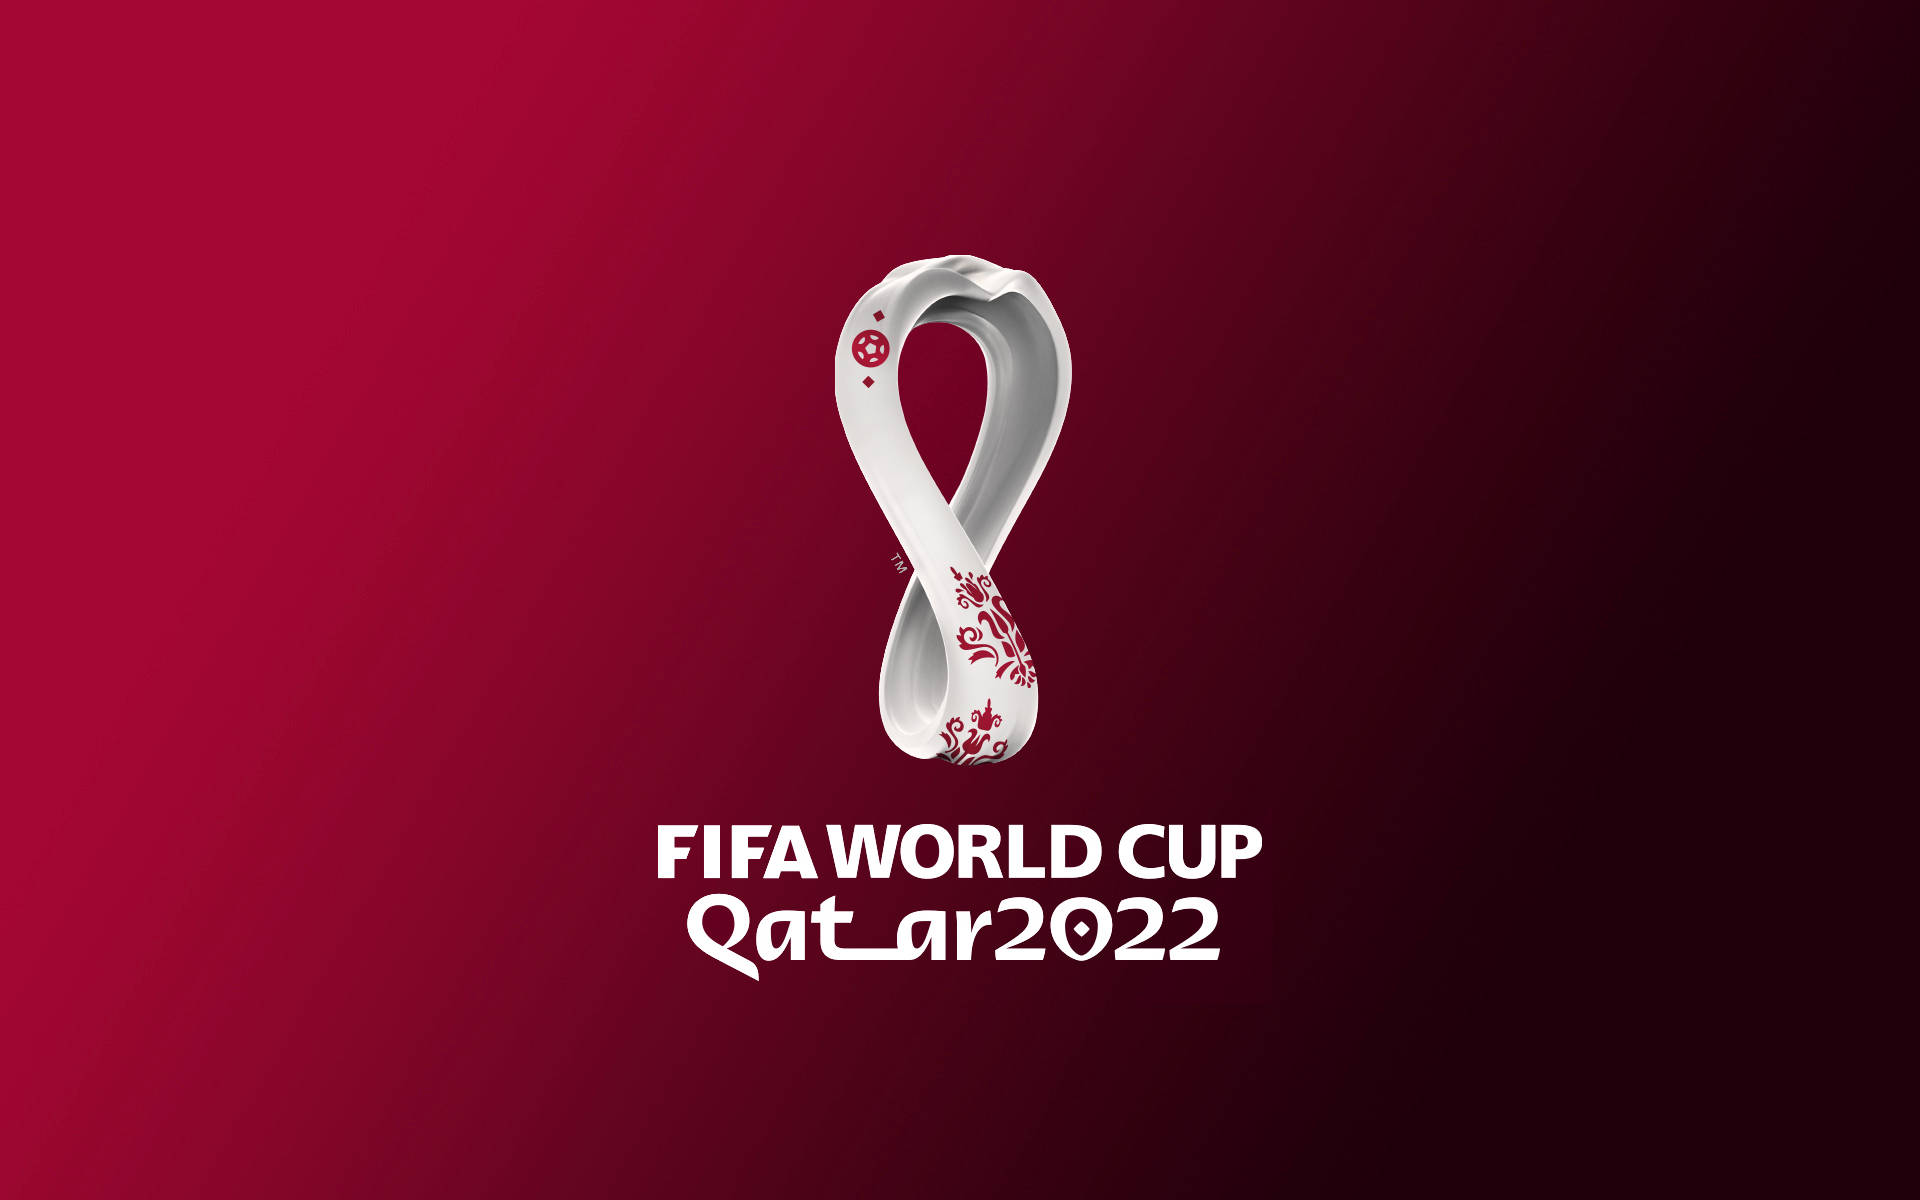 Get Ready For The 2022 Fifa World Cup in Qatar Wallpaper